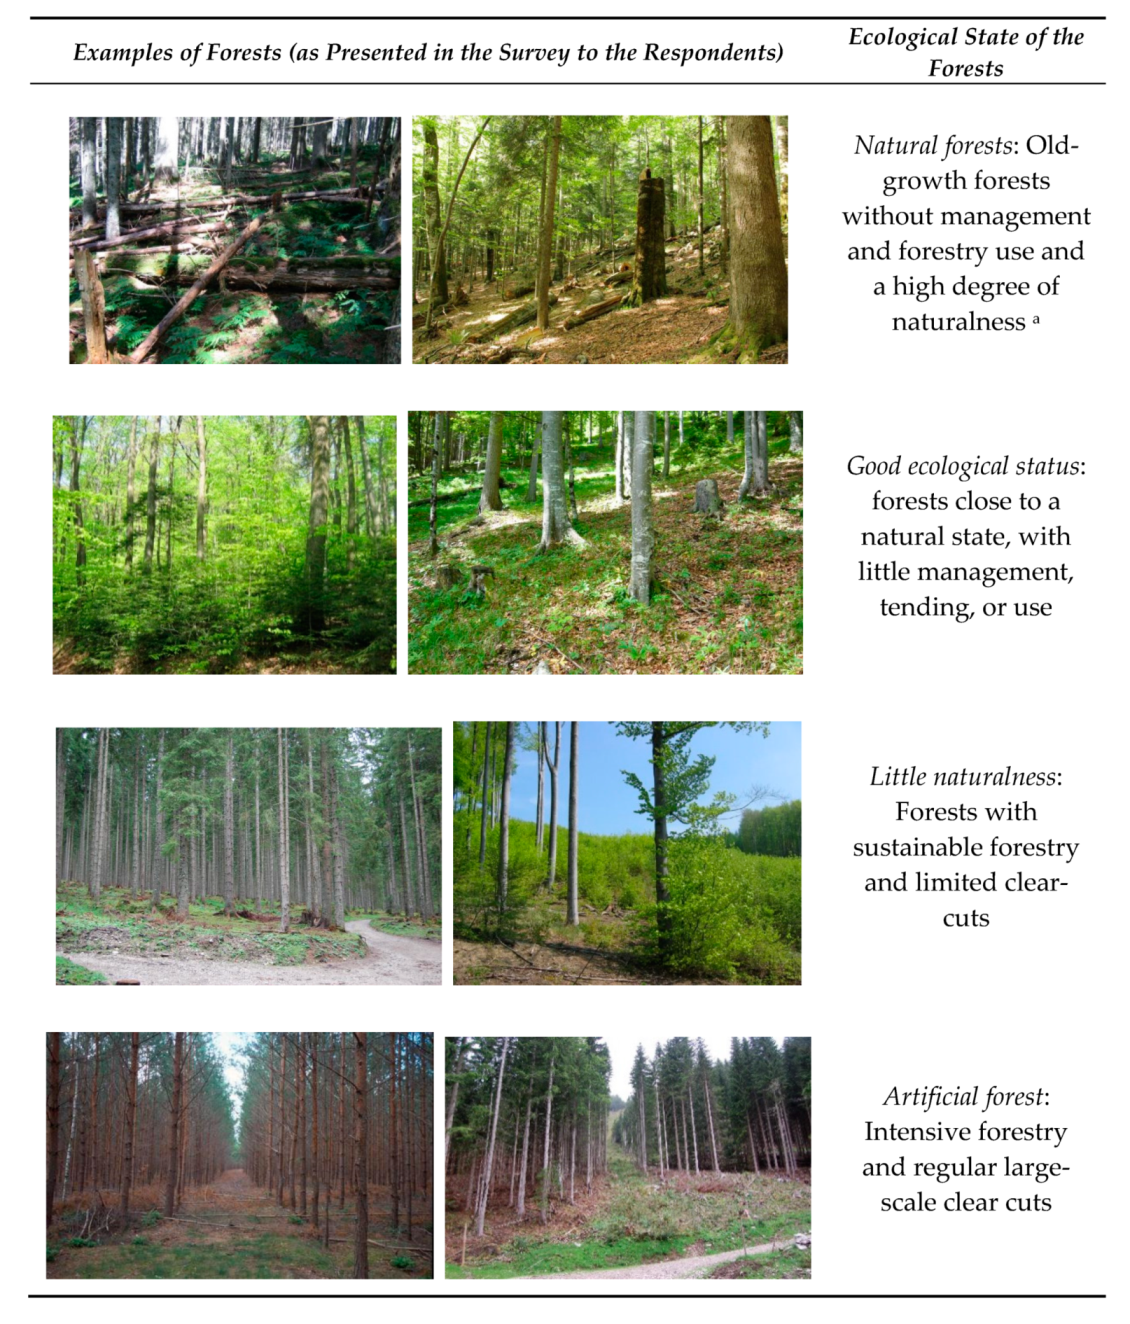 | Free Full-Text The of Local Forest Recreation in Austria and Its Dependence on Naturalness and Quietude |